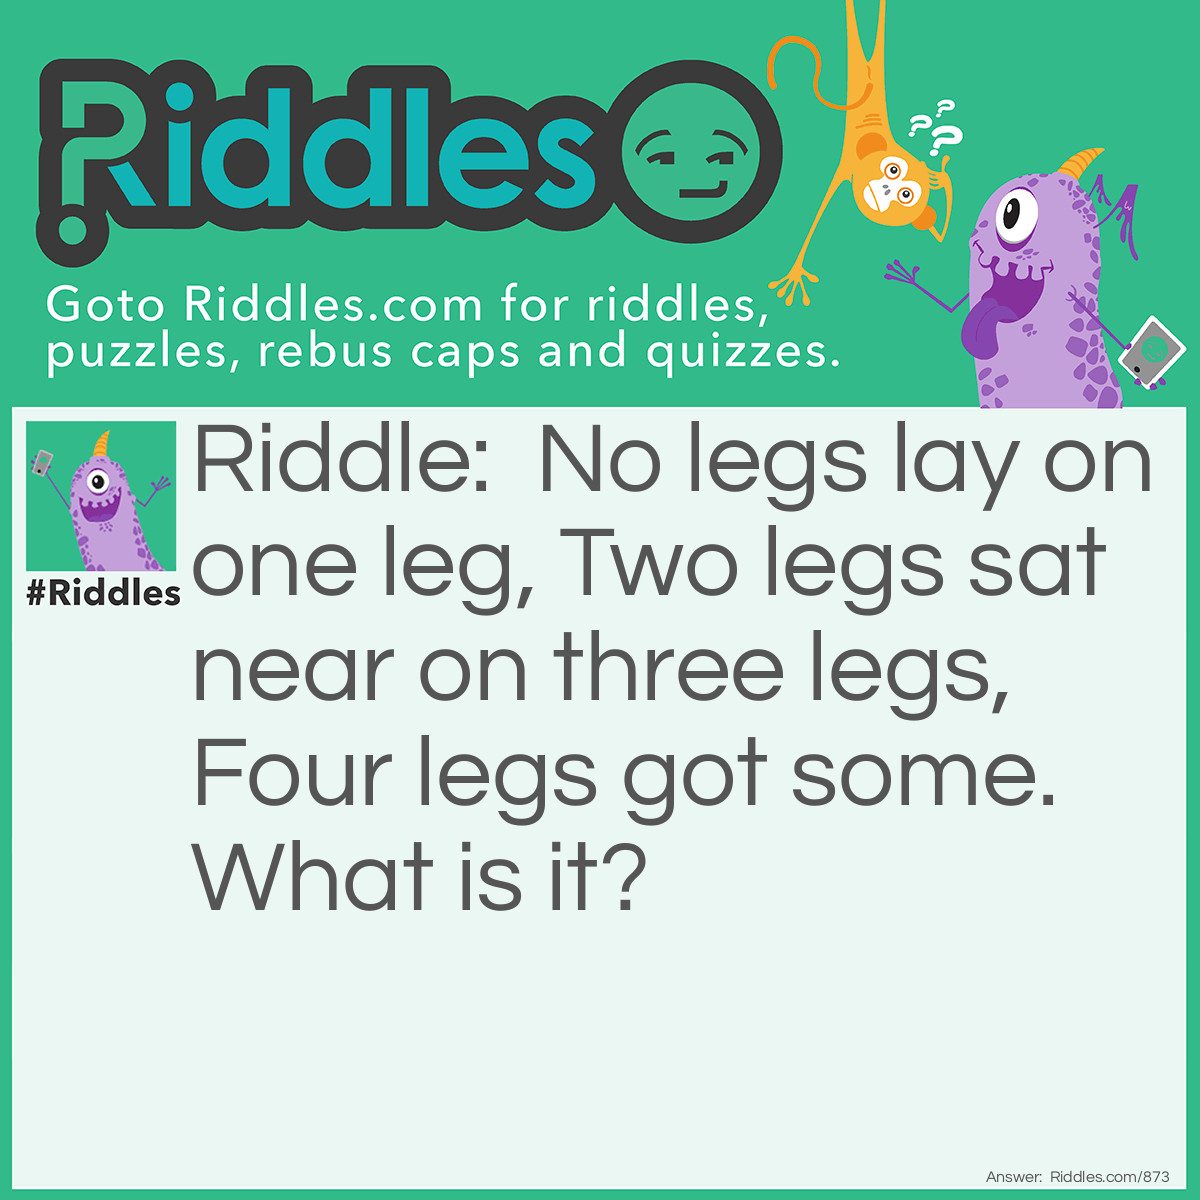 Riddle: No legs lay on one leg, Two legs sat near on three legs, Four legs got some. What is it? Answer: Fish on a little table, man at table sitting on a stool, the cat has the bones.